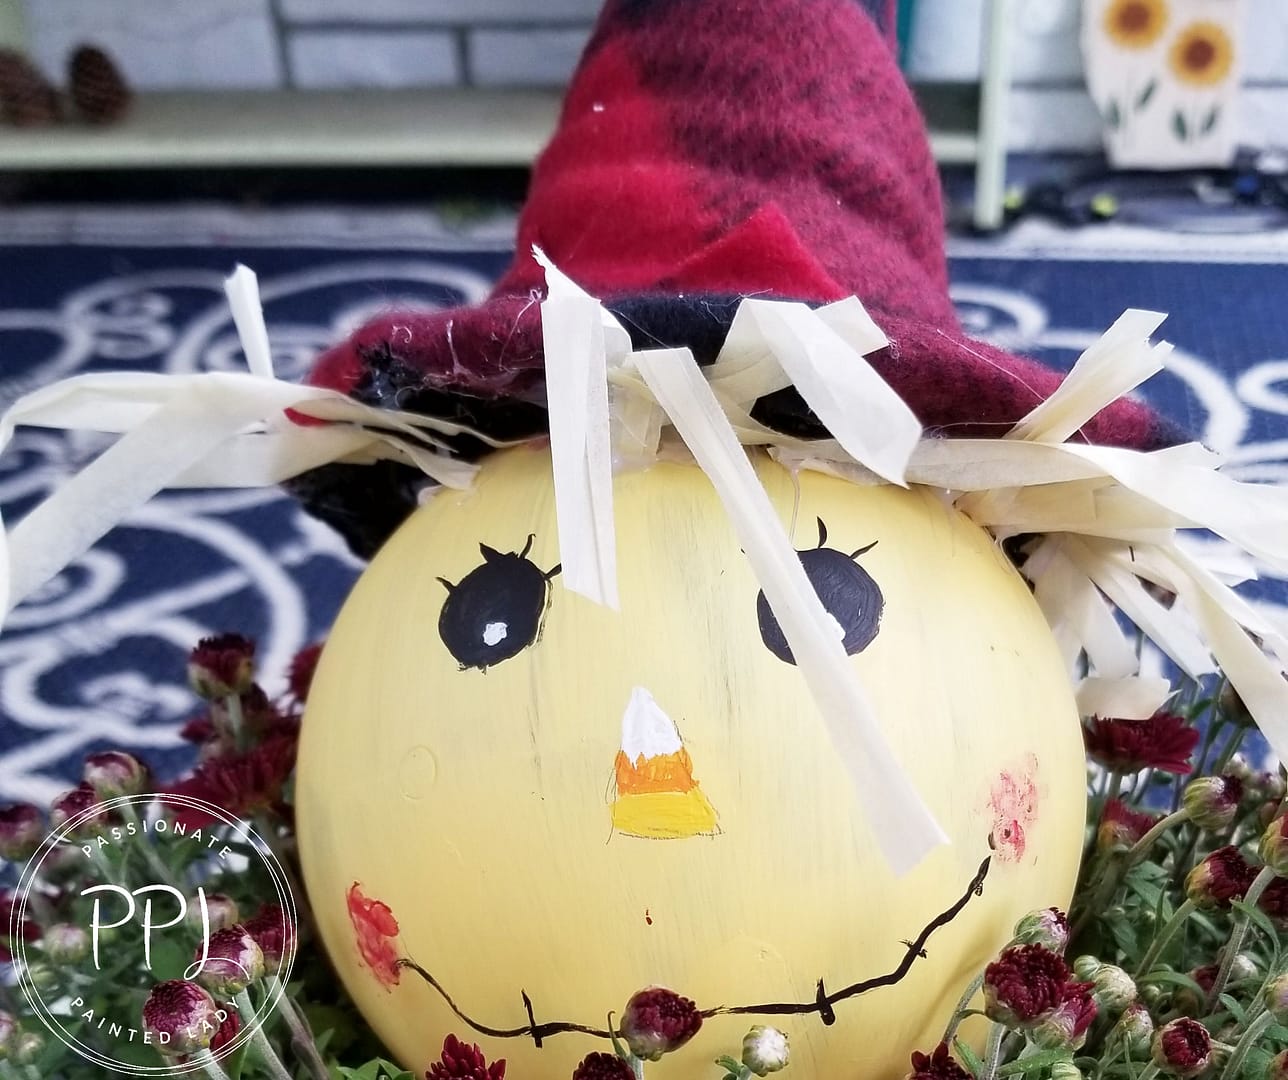 create a pumpkin and scarecrow tealight using simple objects